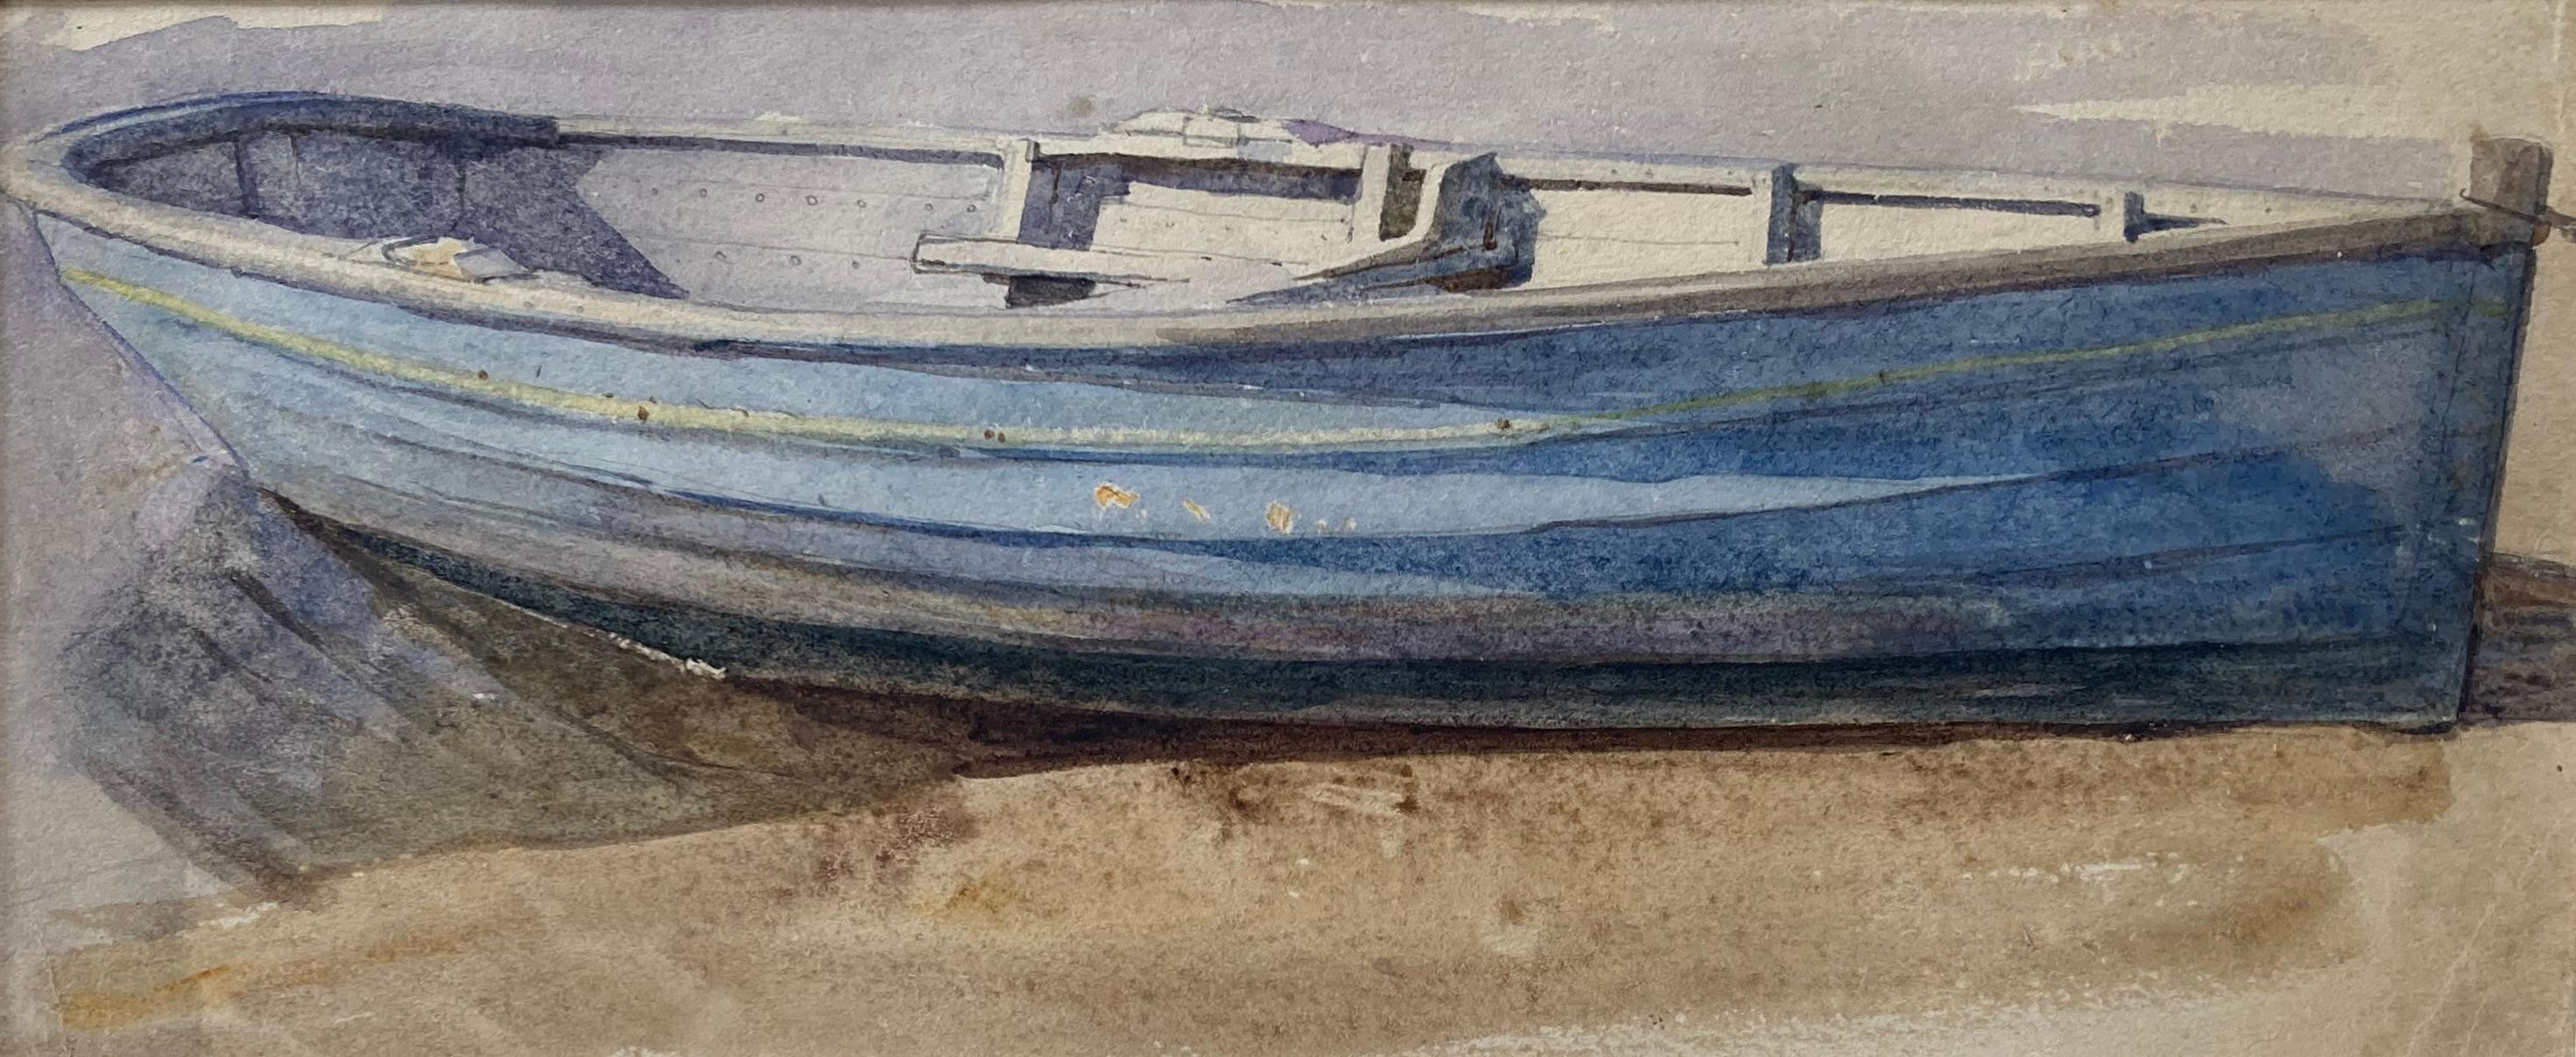 Frederick George Cotman (1850-1920)
A rowing boat on the shore
Watercolour with trace of pencil
4¼ x 10¼ inches

Provenance: Cotman family collection

Frederick George Cotman was born in Ipswich on 14 August 1850. His uncle, John Sell Cotman, was